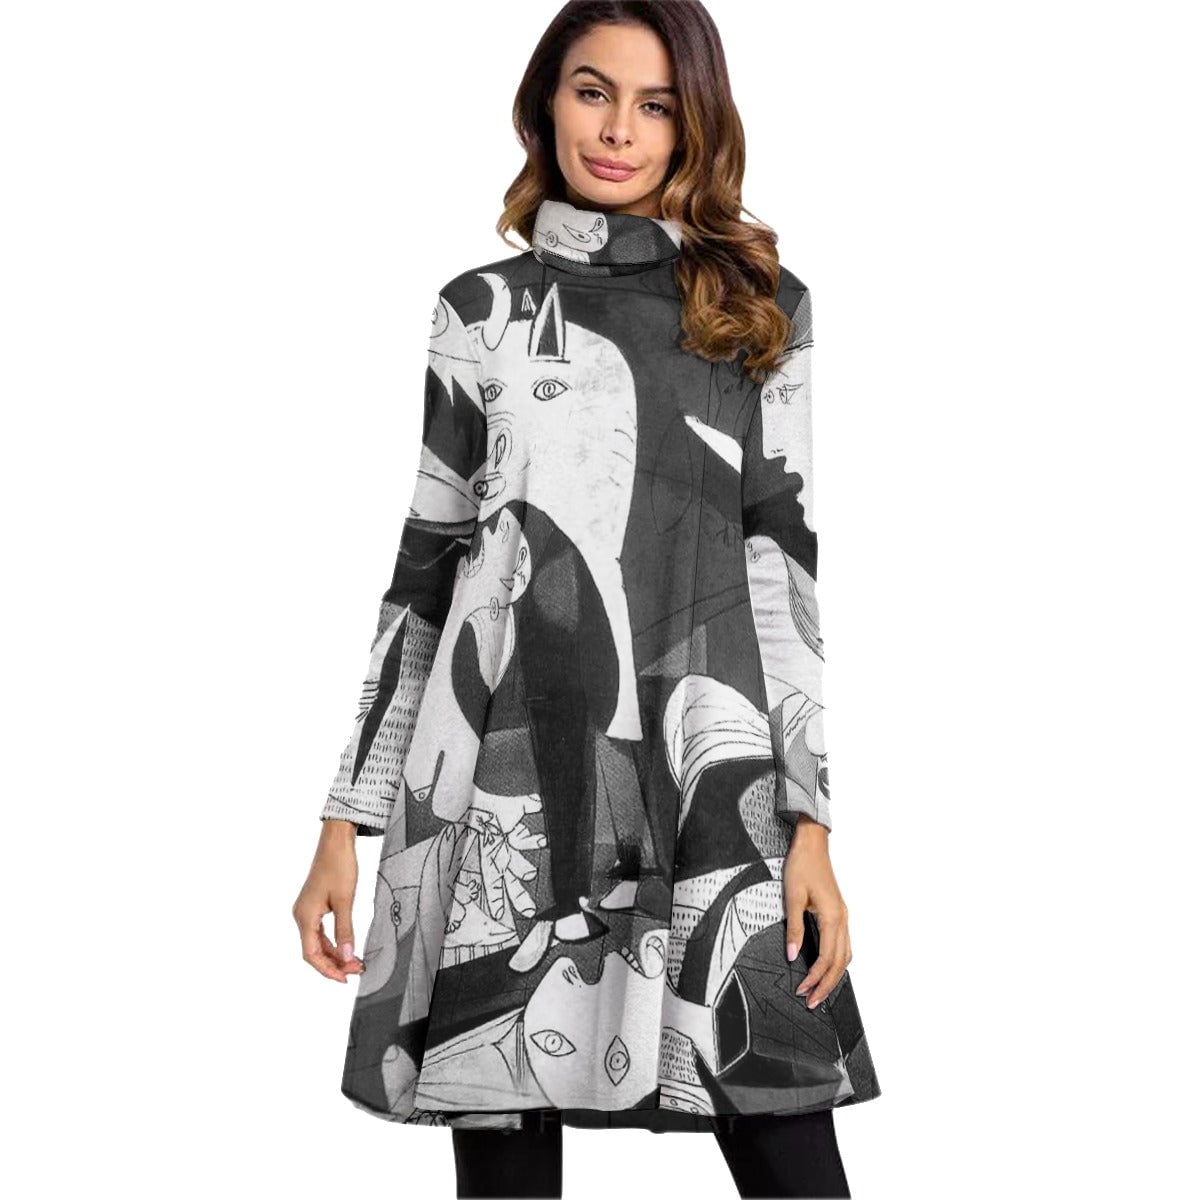 Guernica by Pablo Picasso Art Dress Long Sleeve